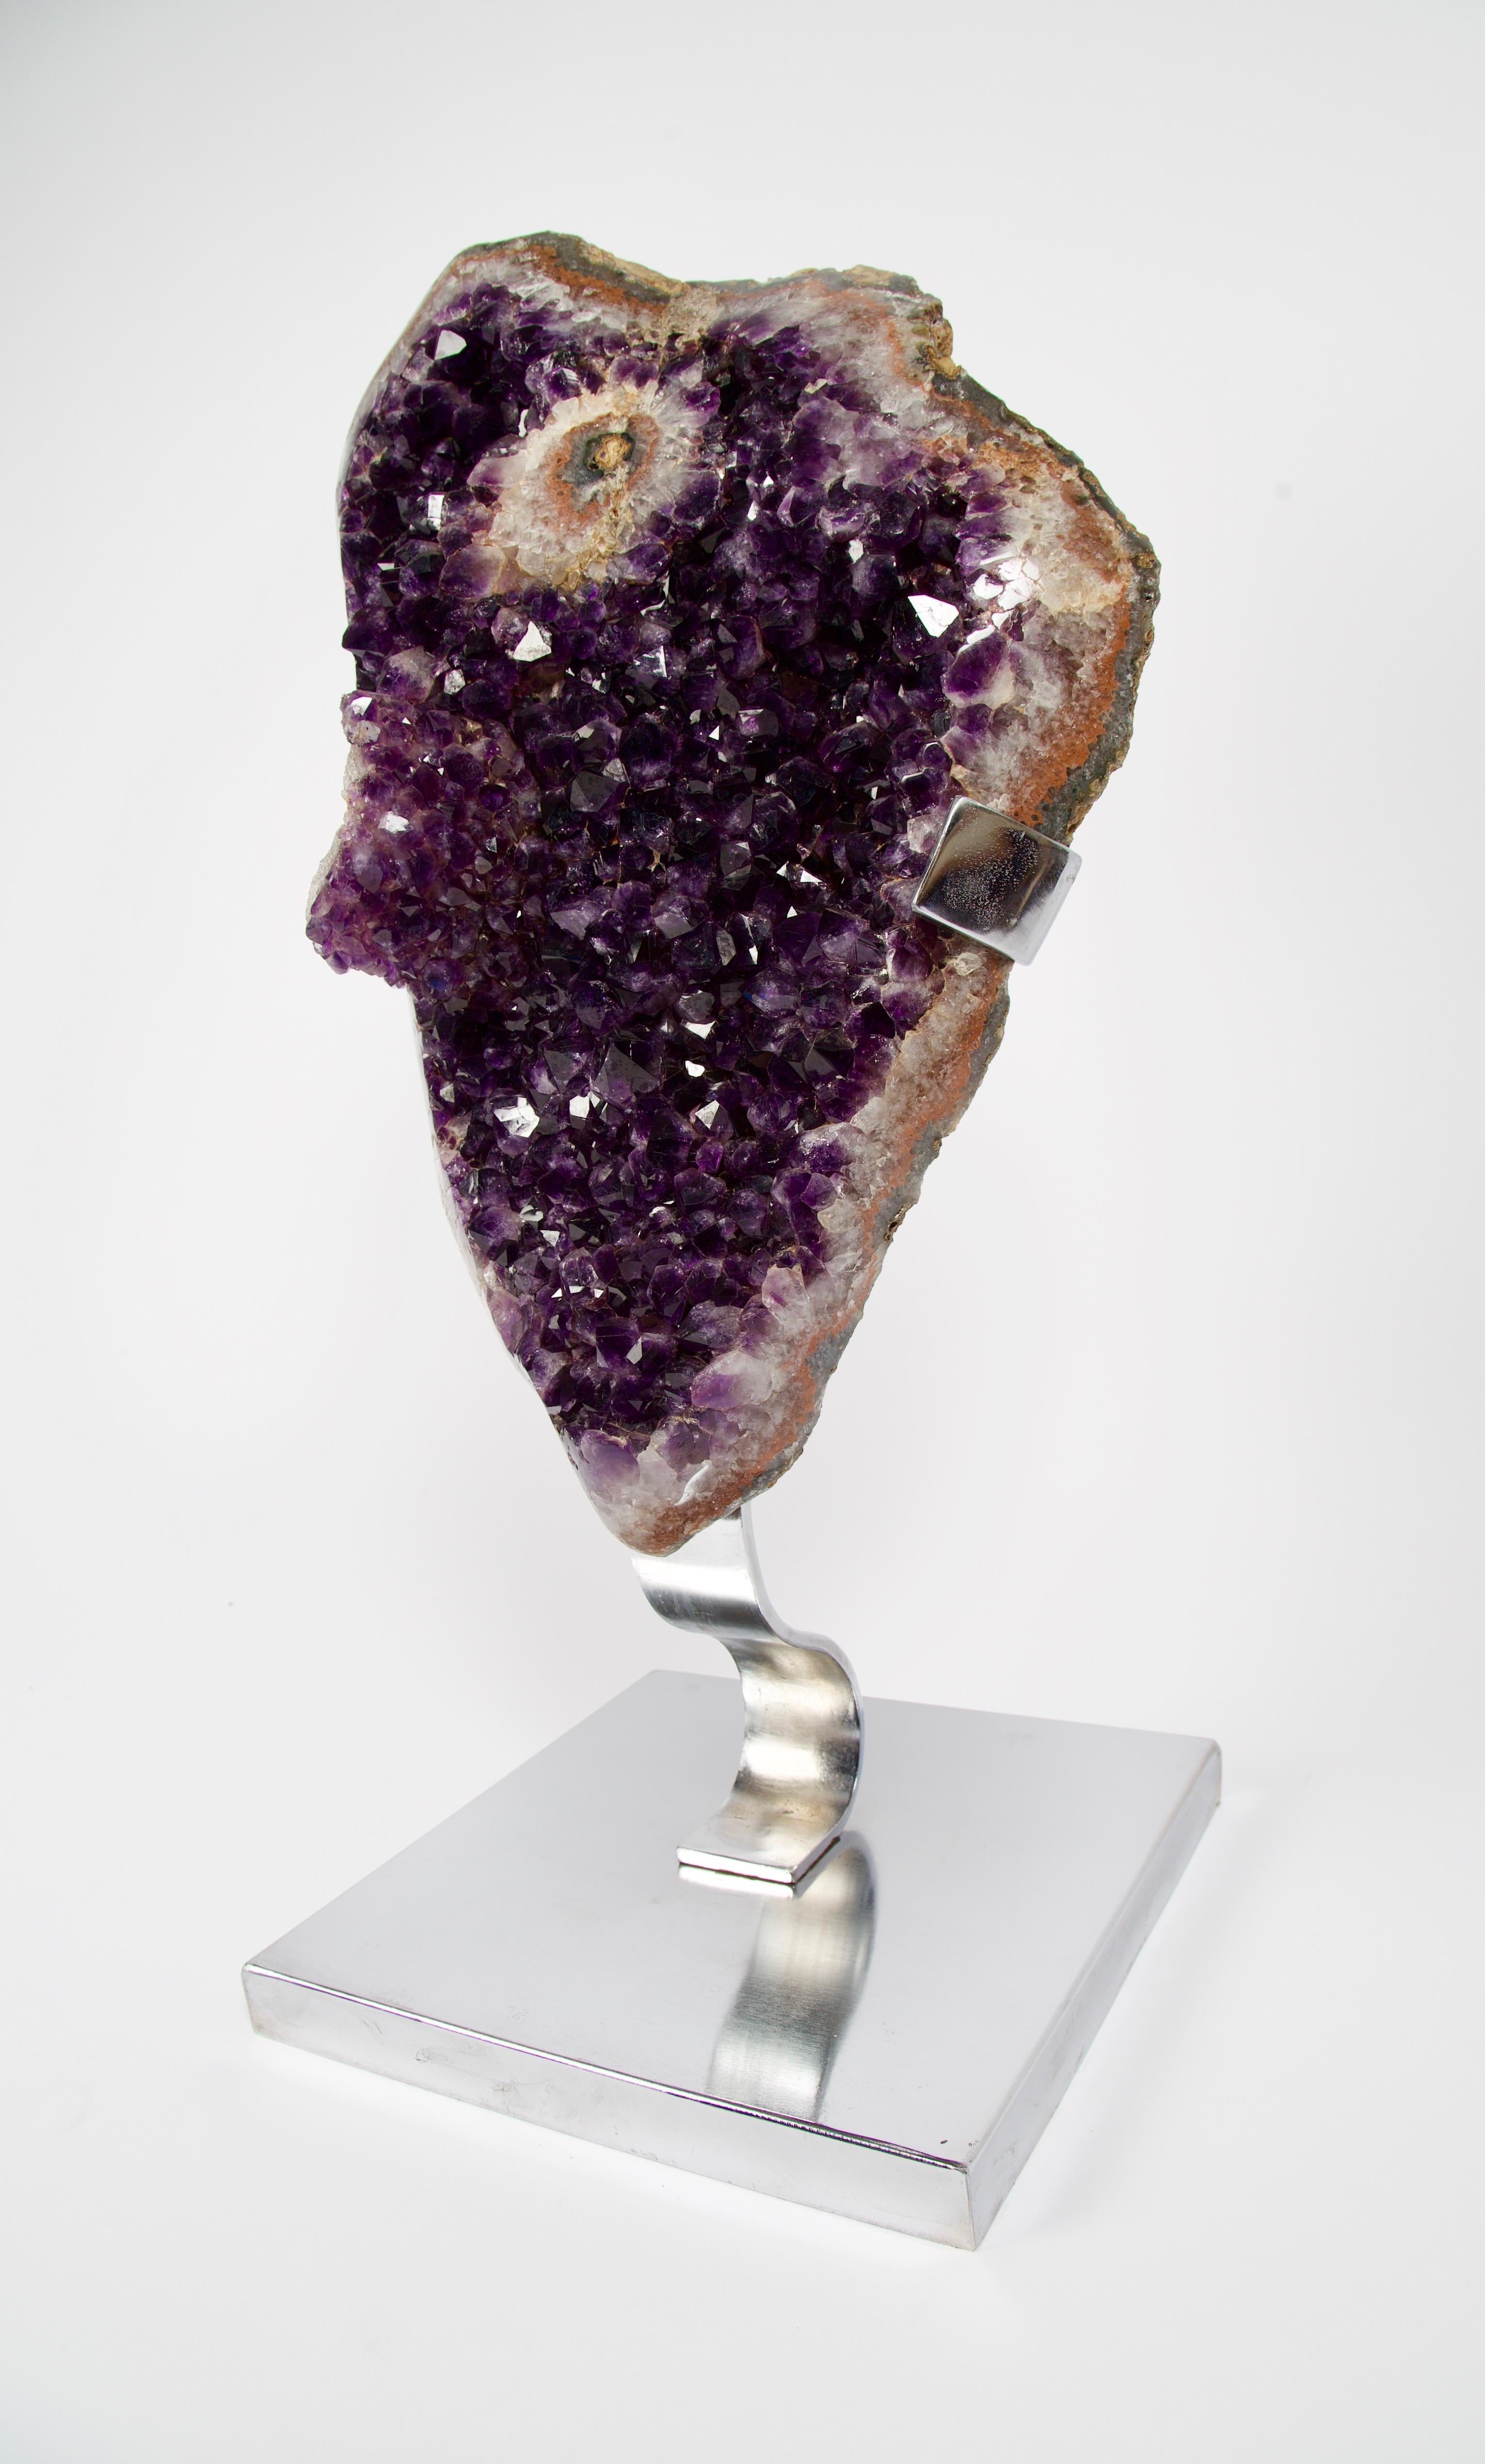 Gem grade, Amethyst Geode Sculpture
The amethyst geodes from Uruguay are mined from the same rock formation as their relatives just to the north across the border into southern Brazil and are igneous (volcanic) in origin. Uruguay amethyst, however,